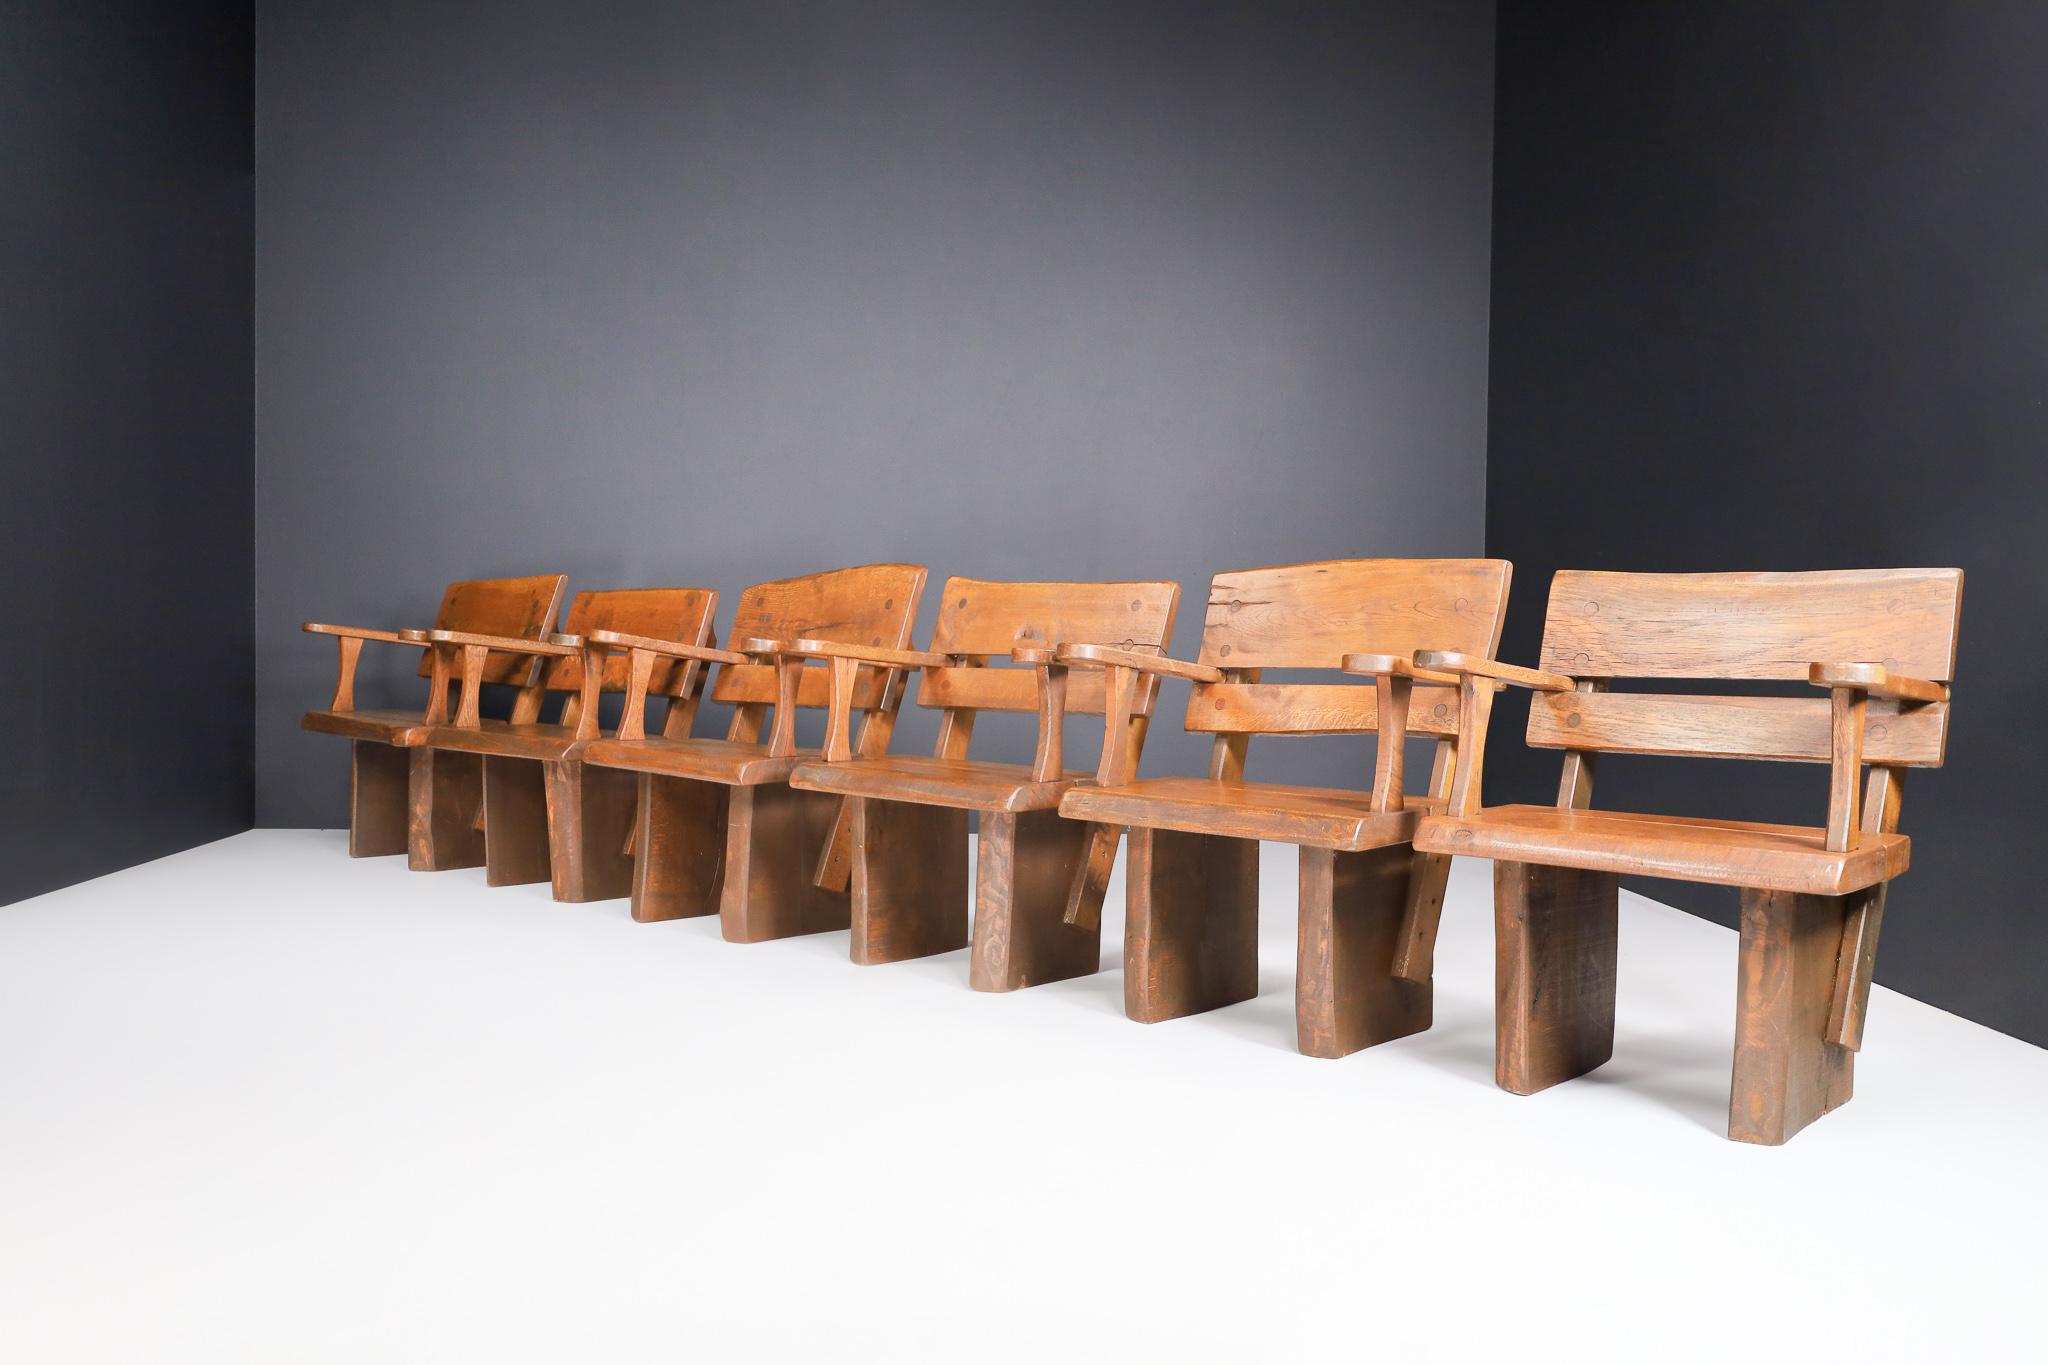 French Brutalist Sculptural Arm Chairs in Solid Oak, France, 1960s